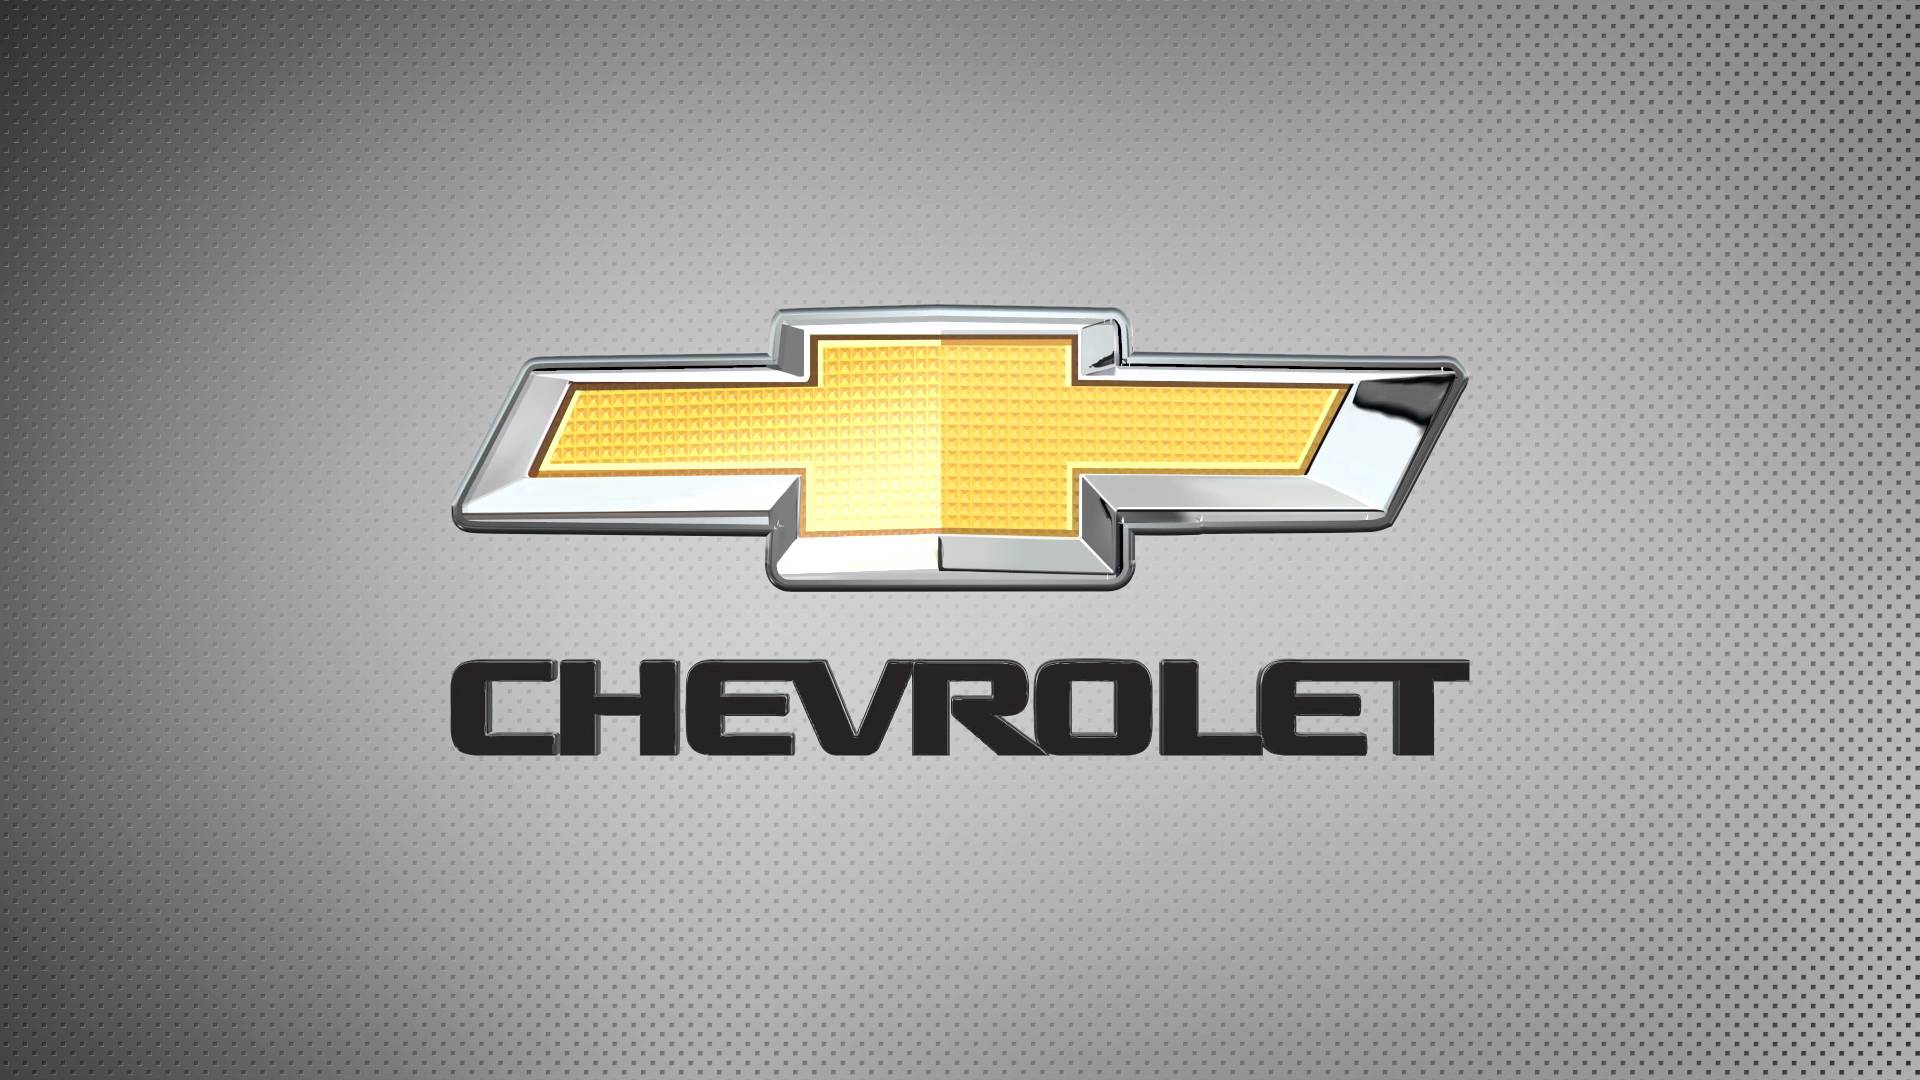 Chevrolet Logo Wallpaper Group , Download for free